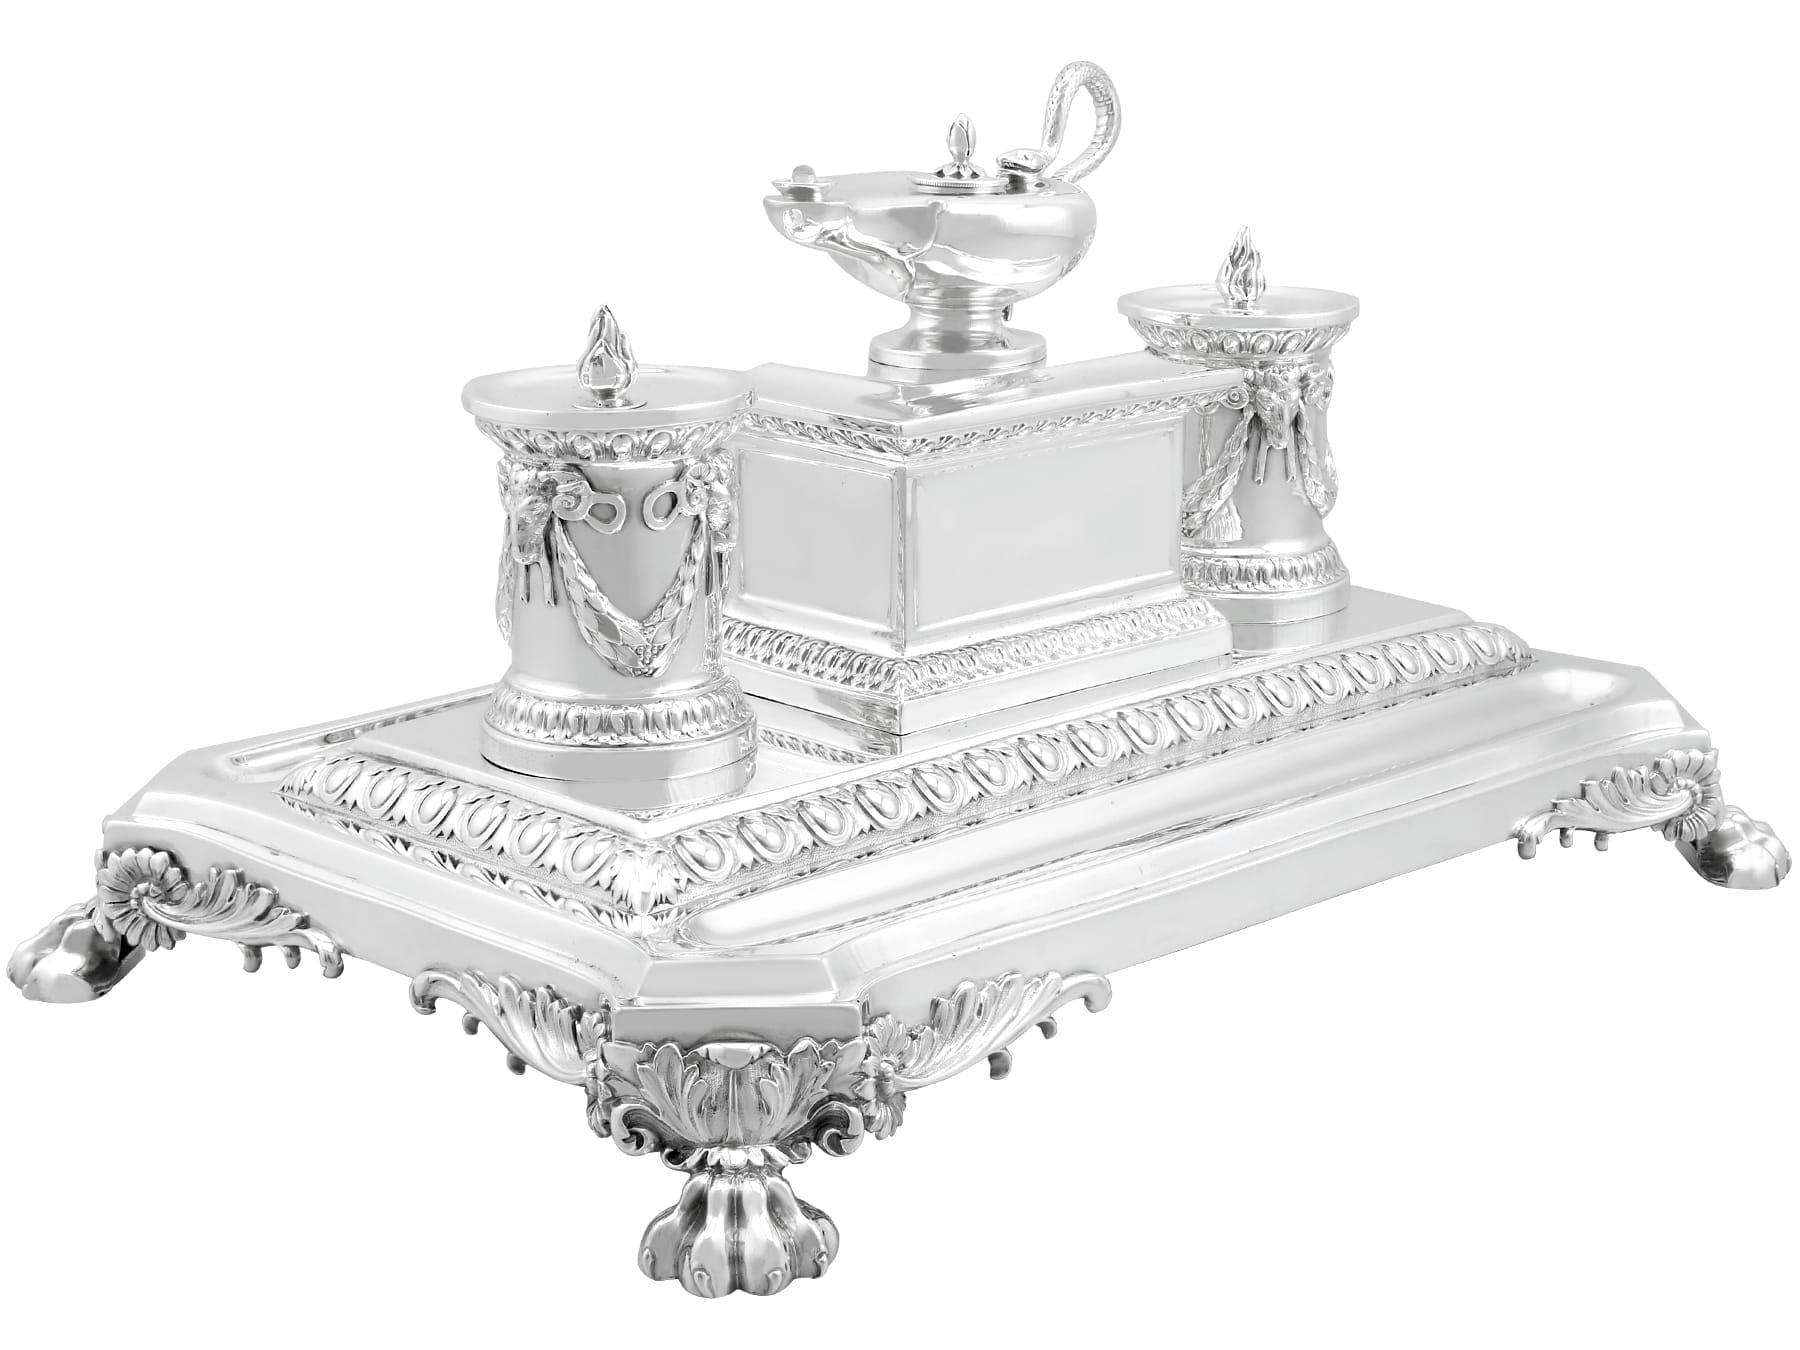 Antique Victorian Sterling Silver Inkstand / Desk Standish In Excellent Condition For Sale In Jesmond, Newcastle Upon Tyne